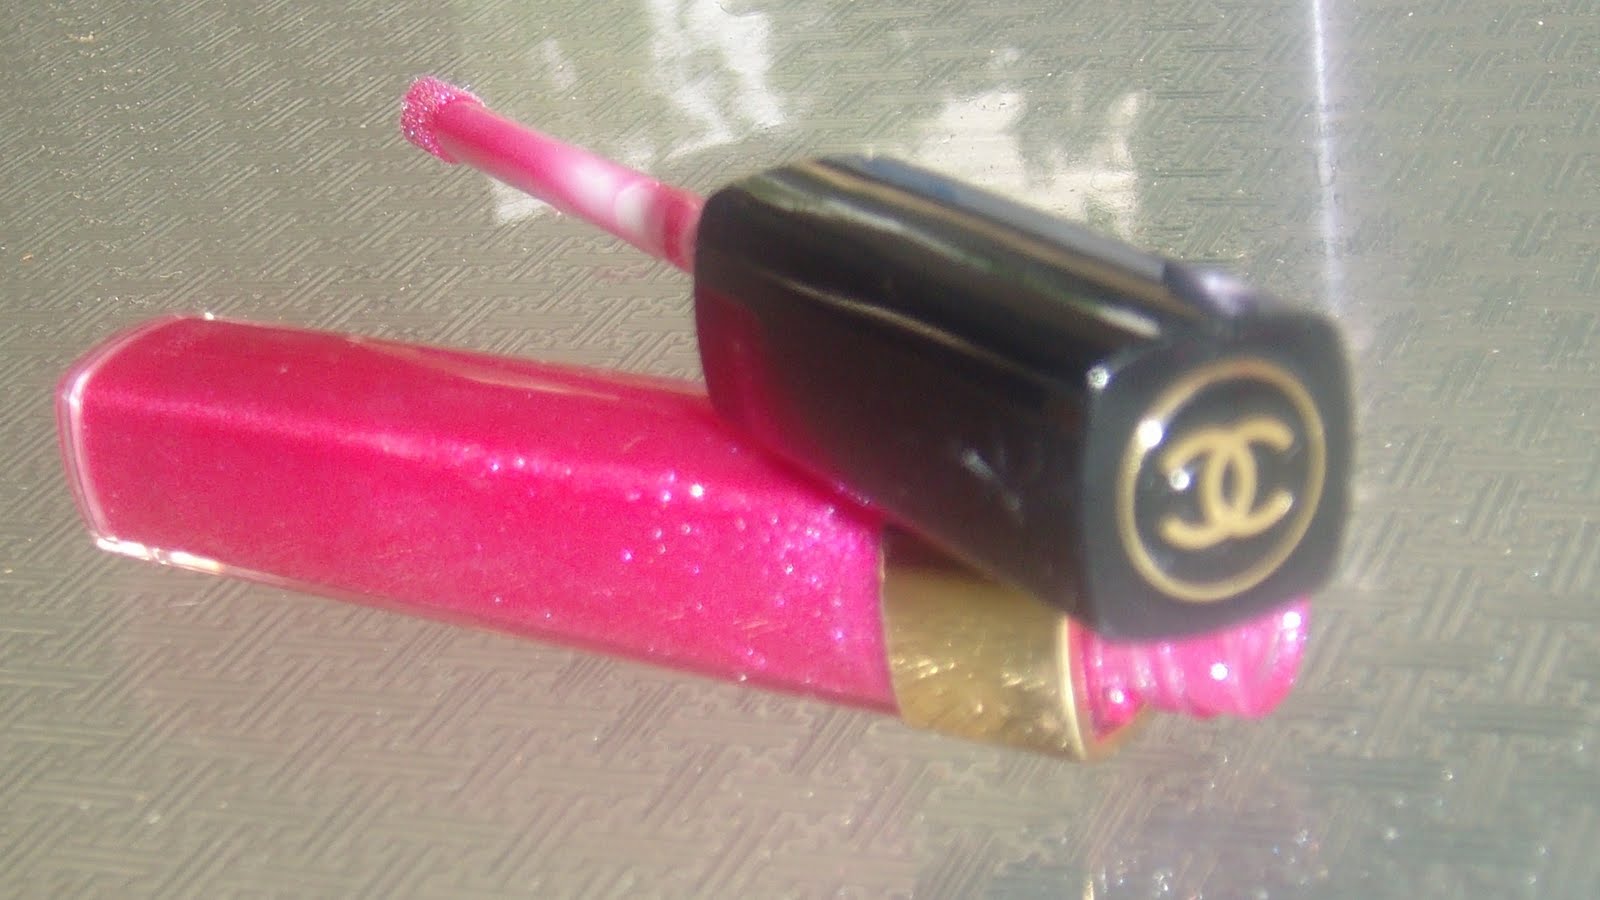 Chanel AMOUR Levres Scintillantes Glossimer Swatches and Review